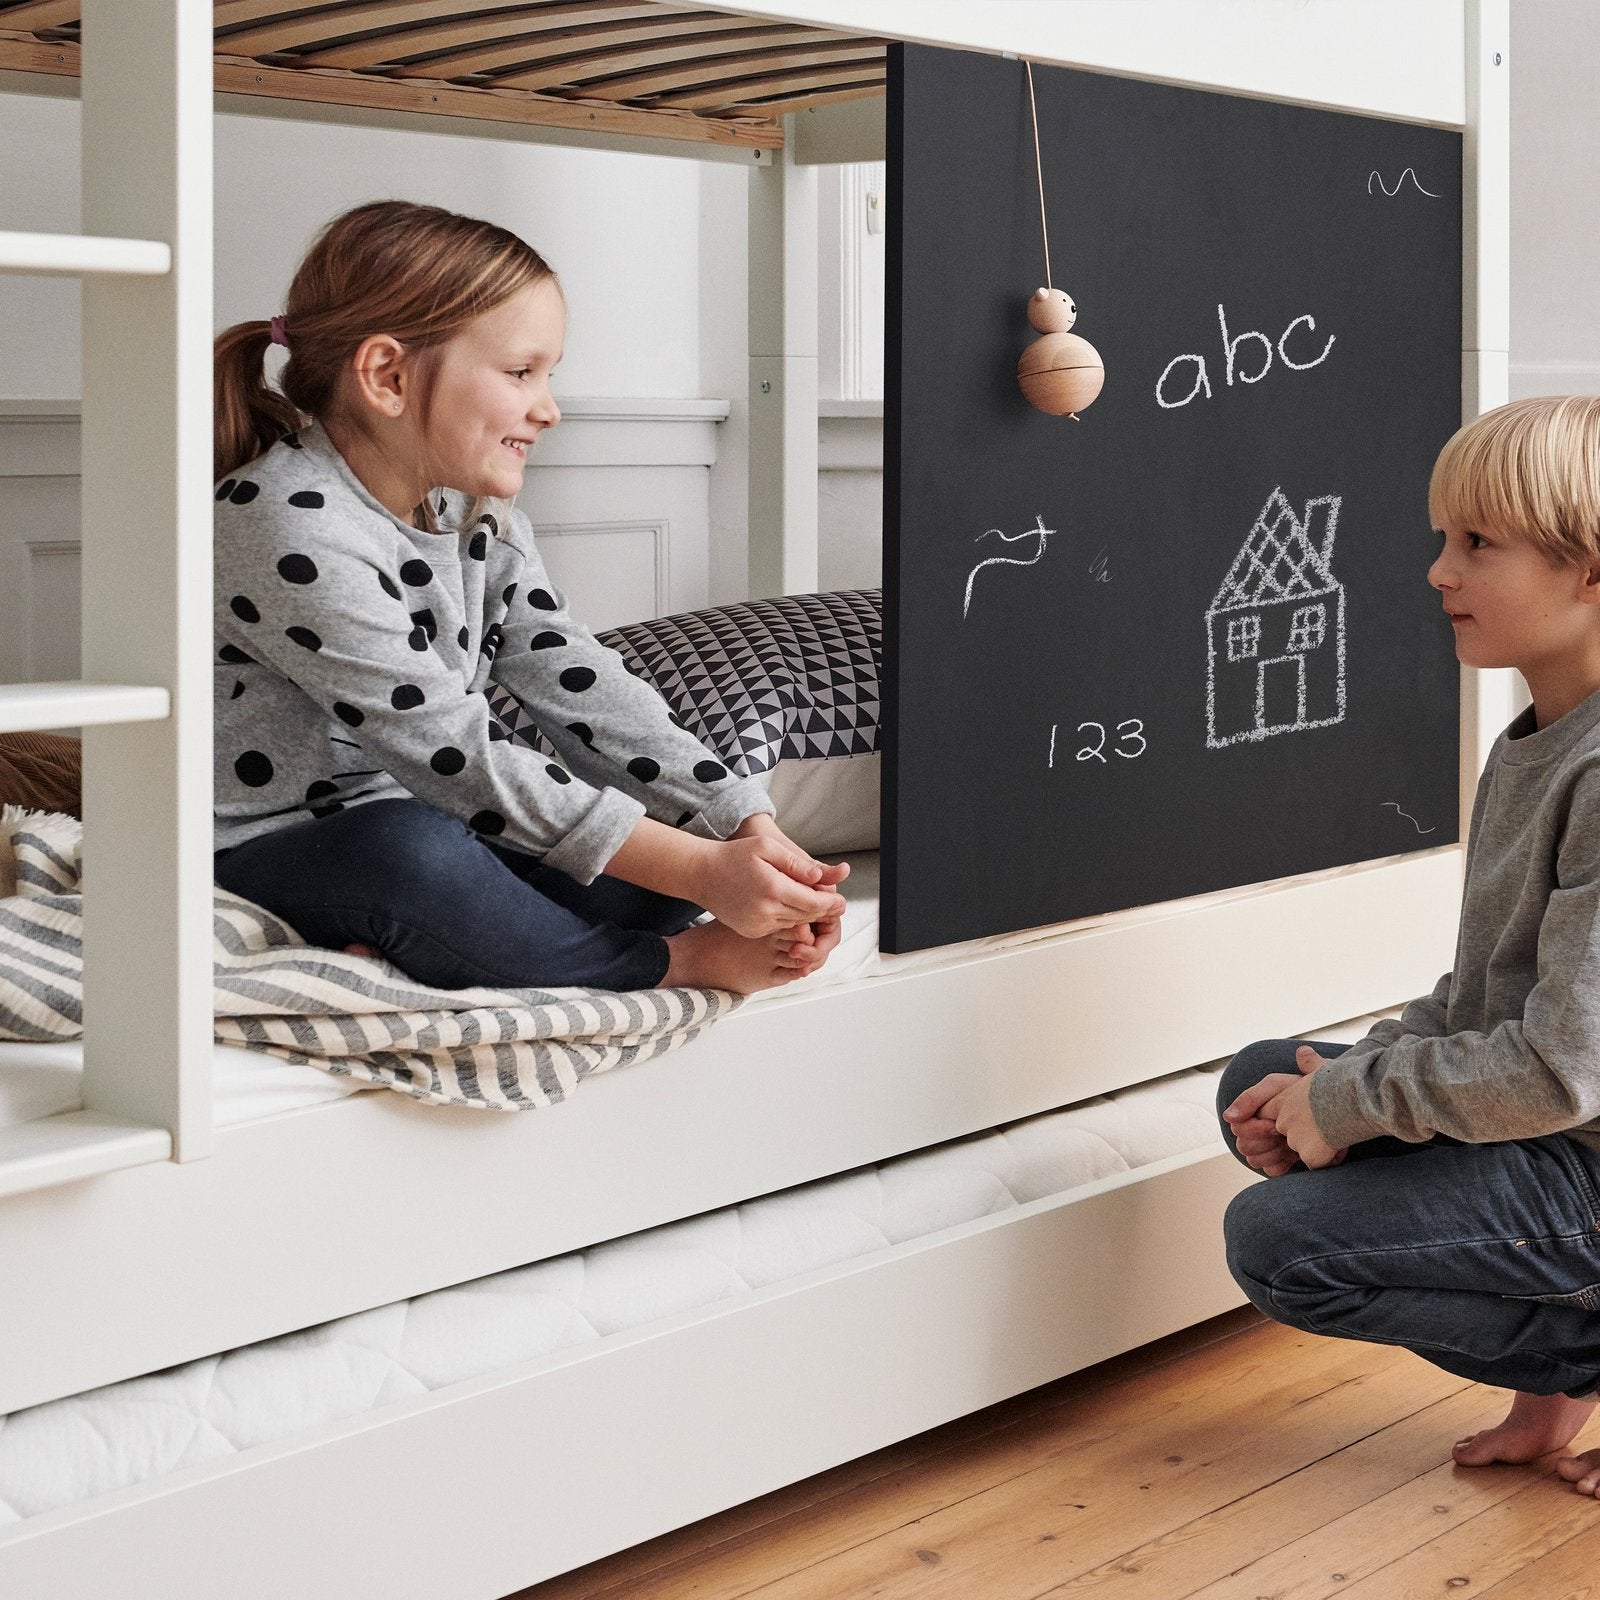 Manis-h Chalkboard for Manis-H Mid Sleeper and Bunk bed